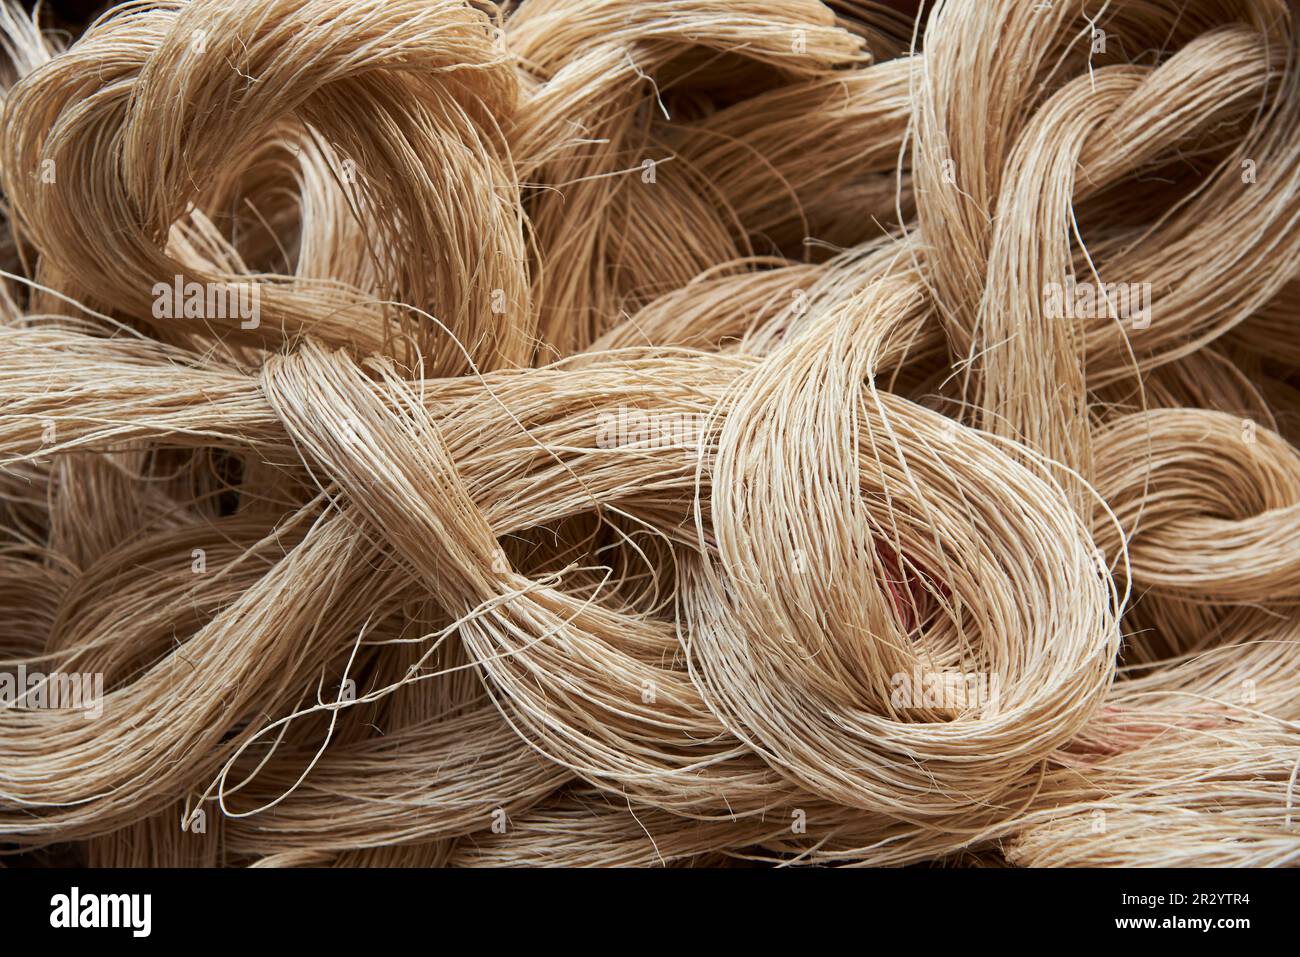 Fique fiber, a vegetable material traditionally used in Colombia in the production of ropes, sacks and handicraft products. Textured natural backgroun Stock Photo